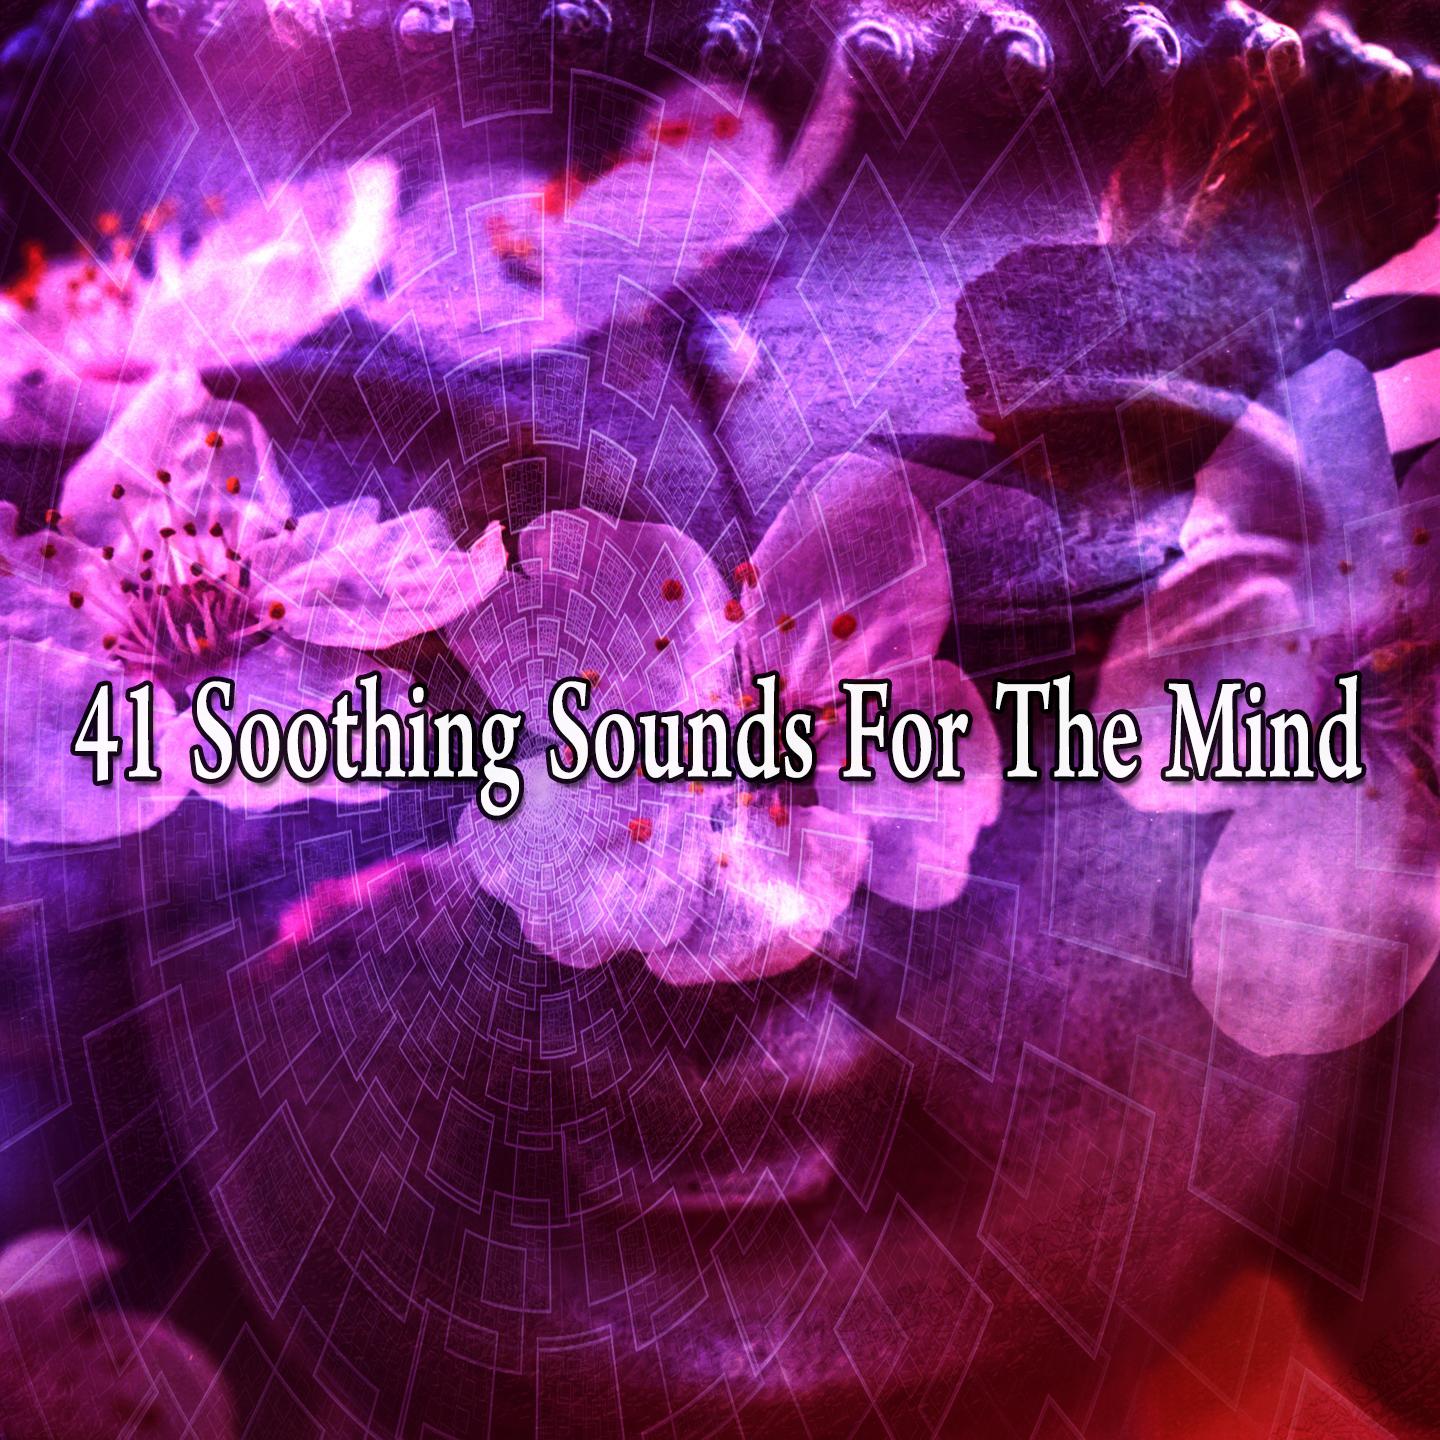 41 Soothing Sounds for the Mind